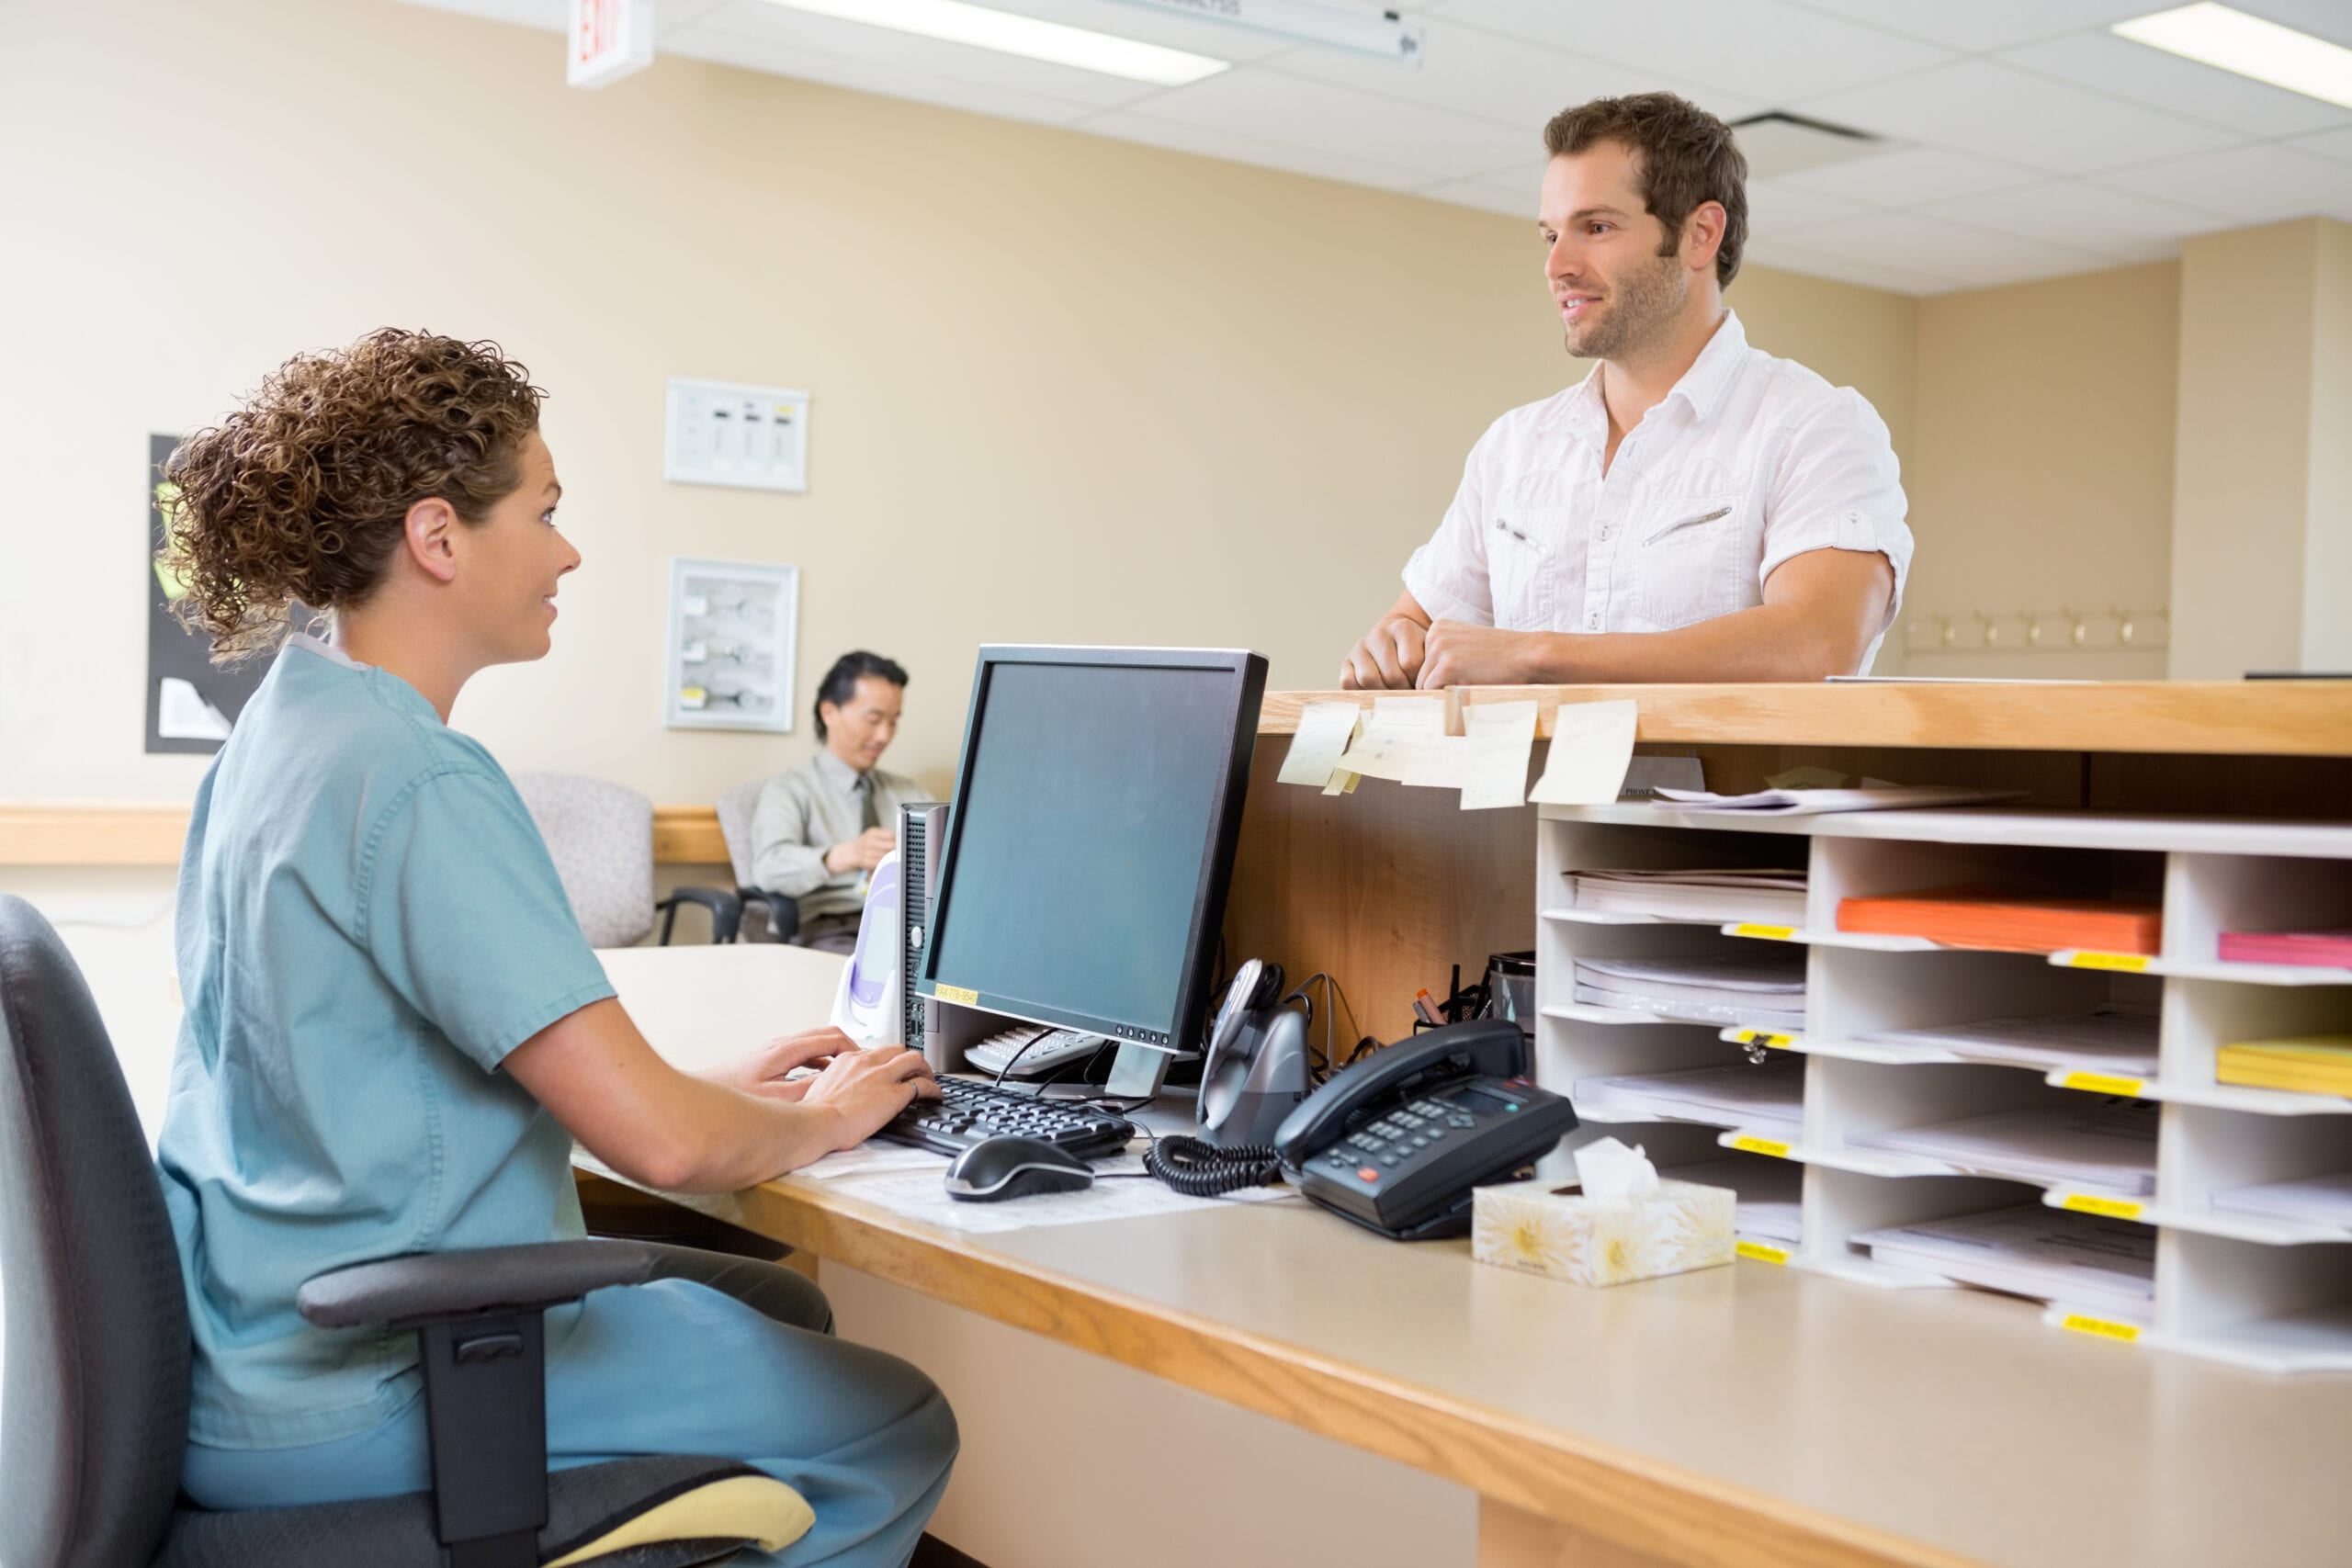 Manage Patients with Systems 4PT's EMR and Physical Therapy Software